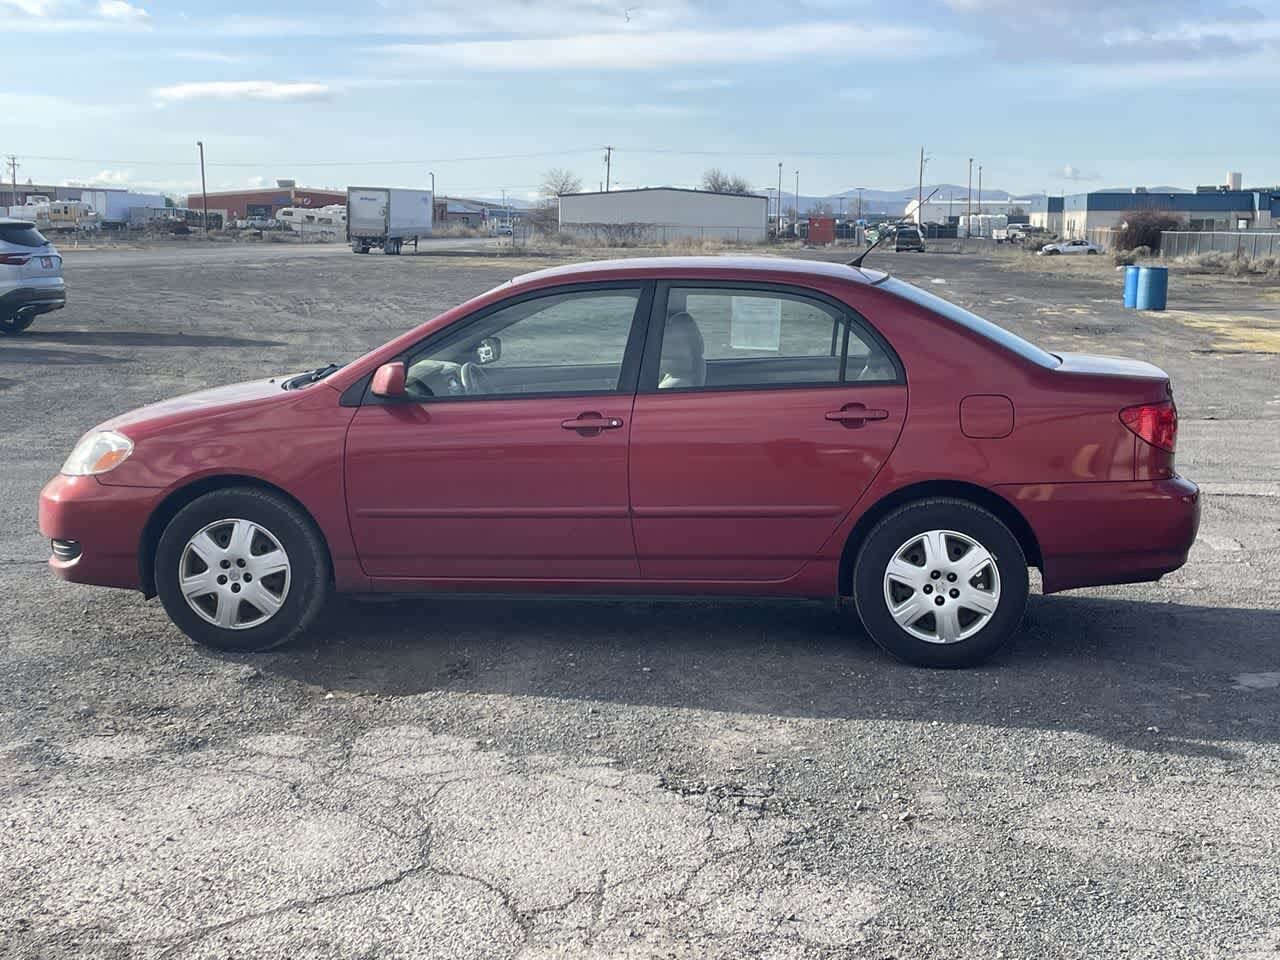 Used 2006 Toyota Corolla LE with VIN 1NXBR32E36Z660829 for sale in Klamath Falls, OR